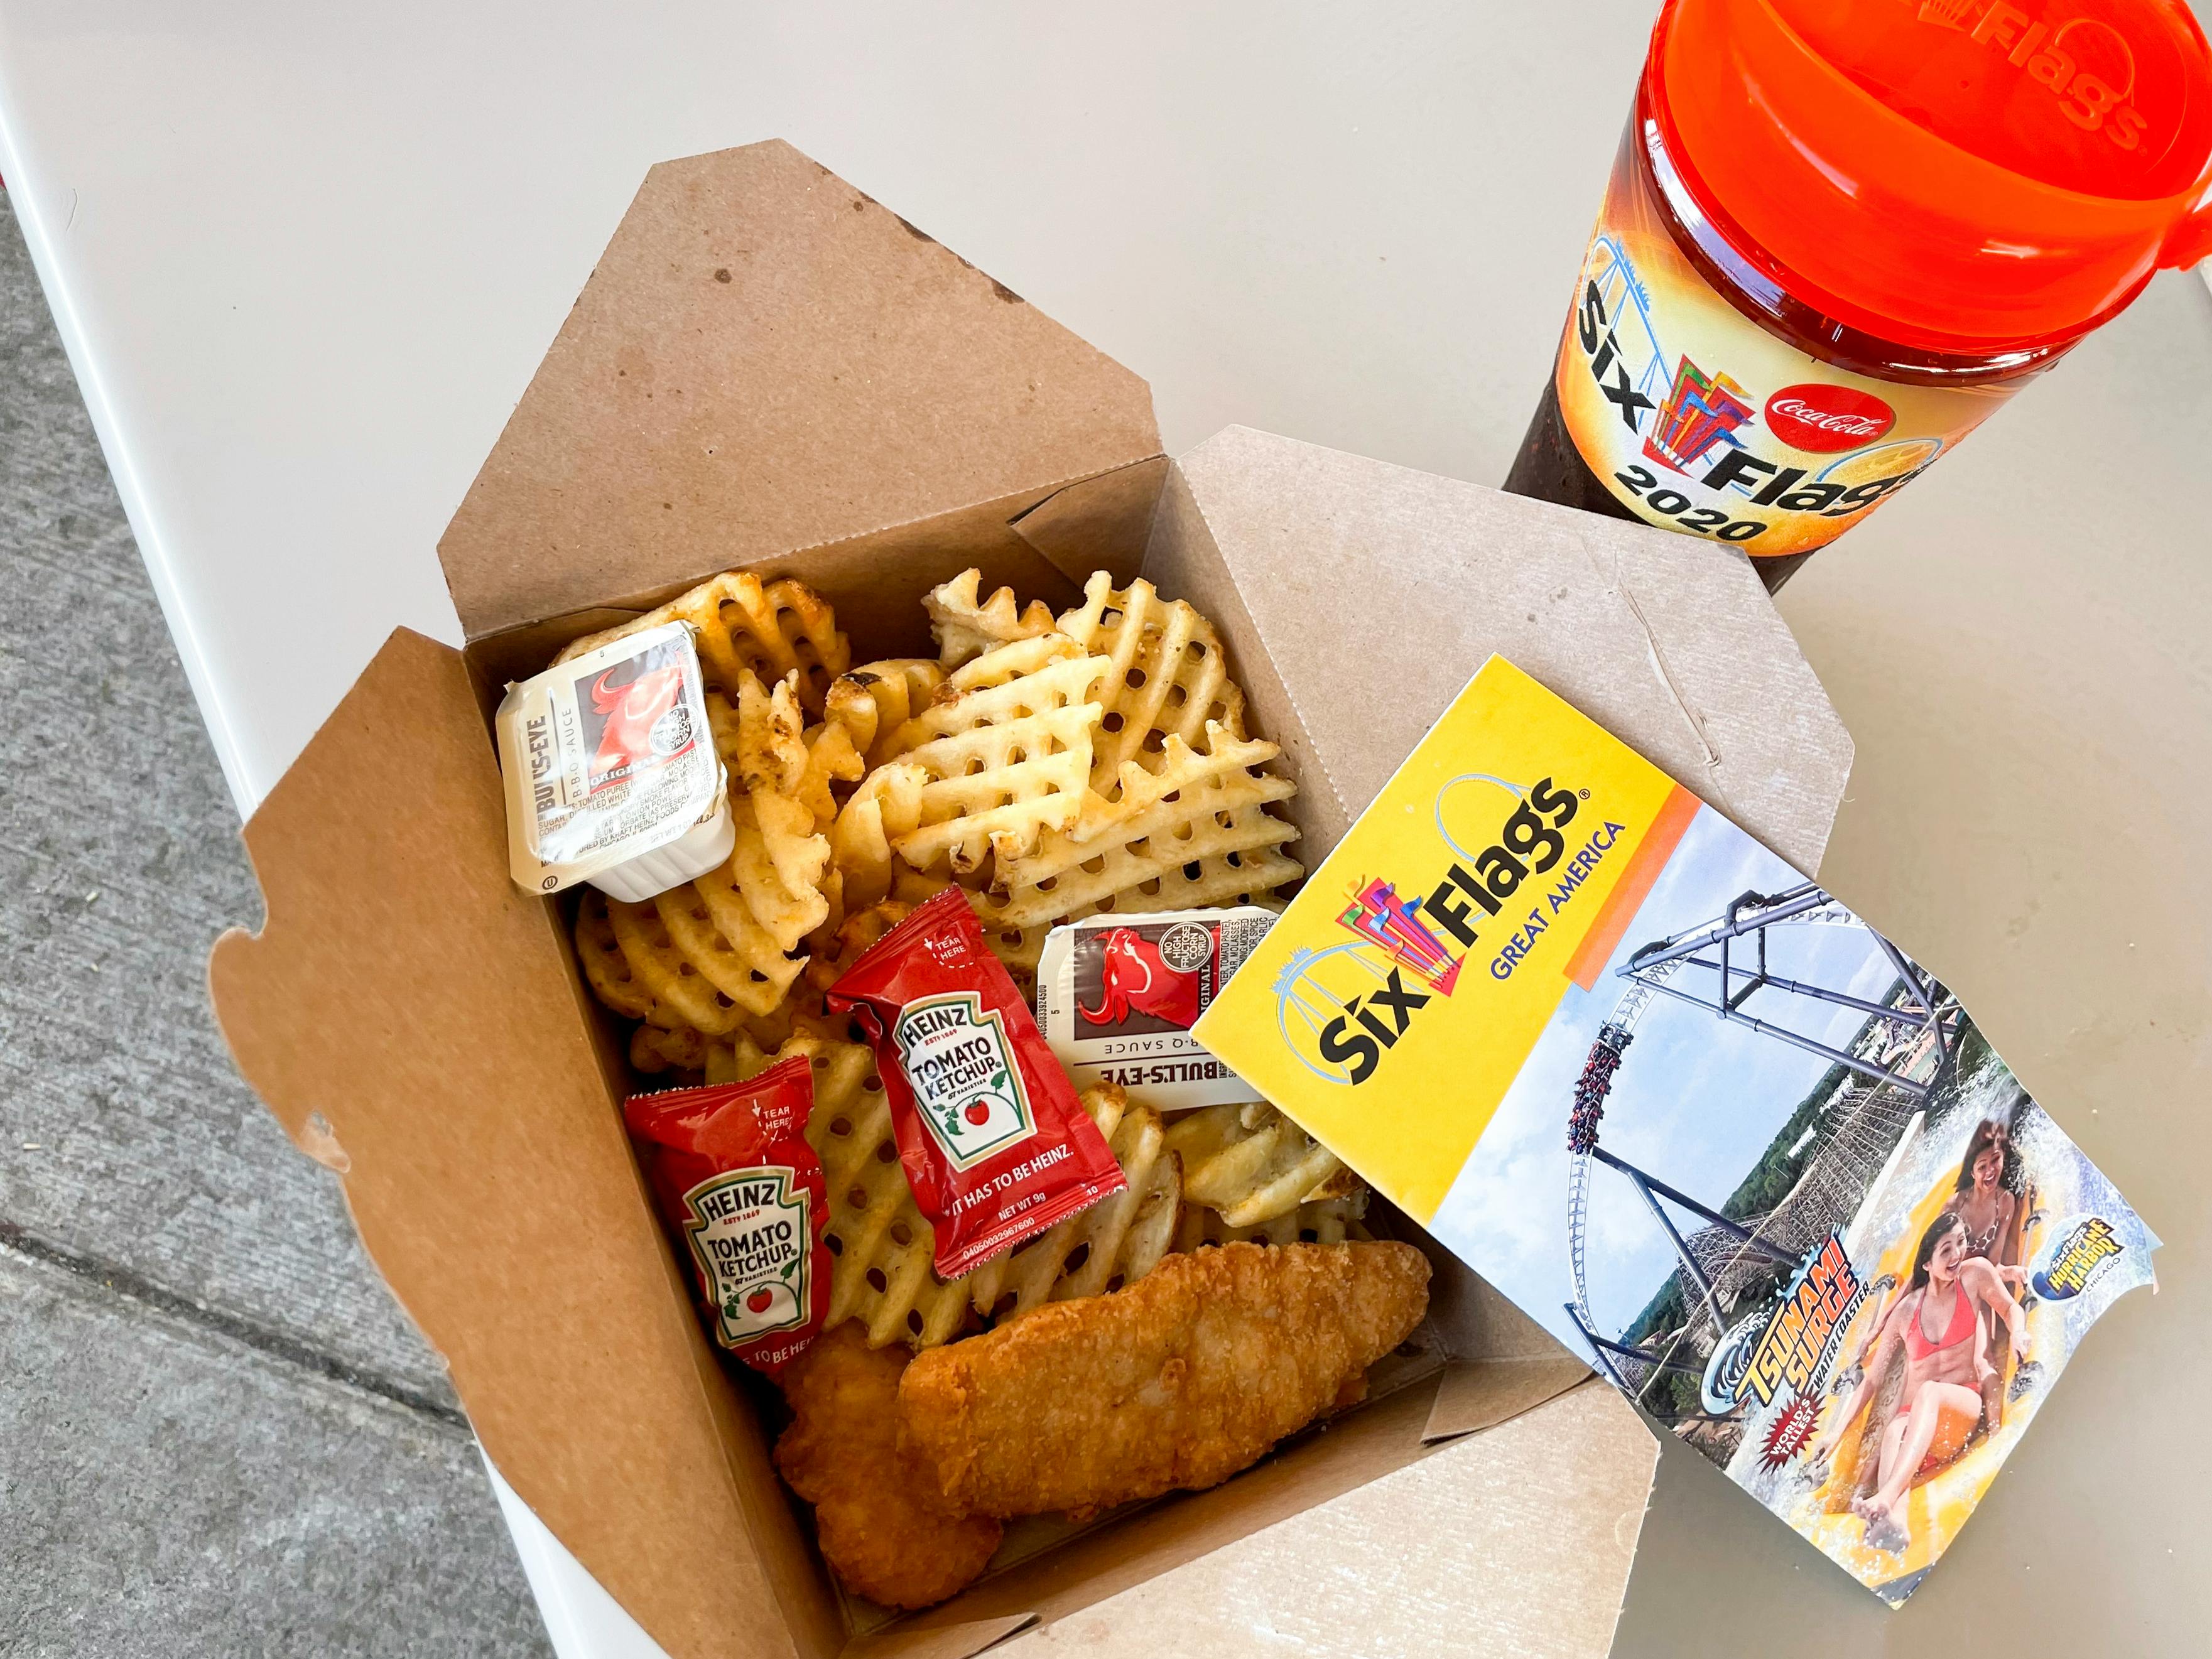 Waffle fries and chicken fingers in a cardboard box next to a refillable soft drink cup and Six Flags theme park map